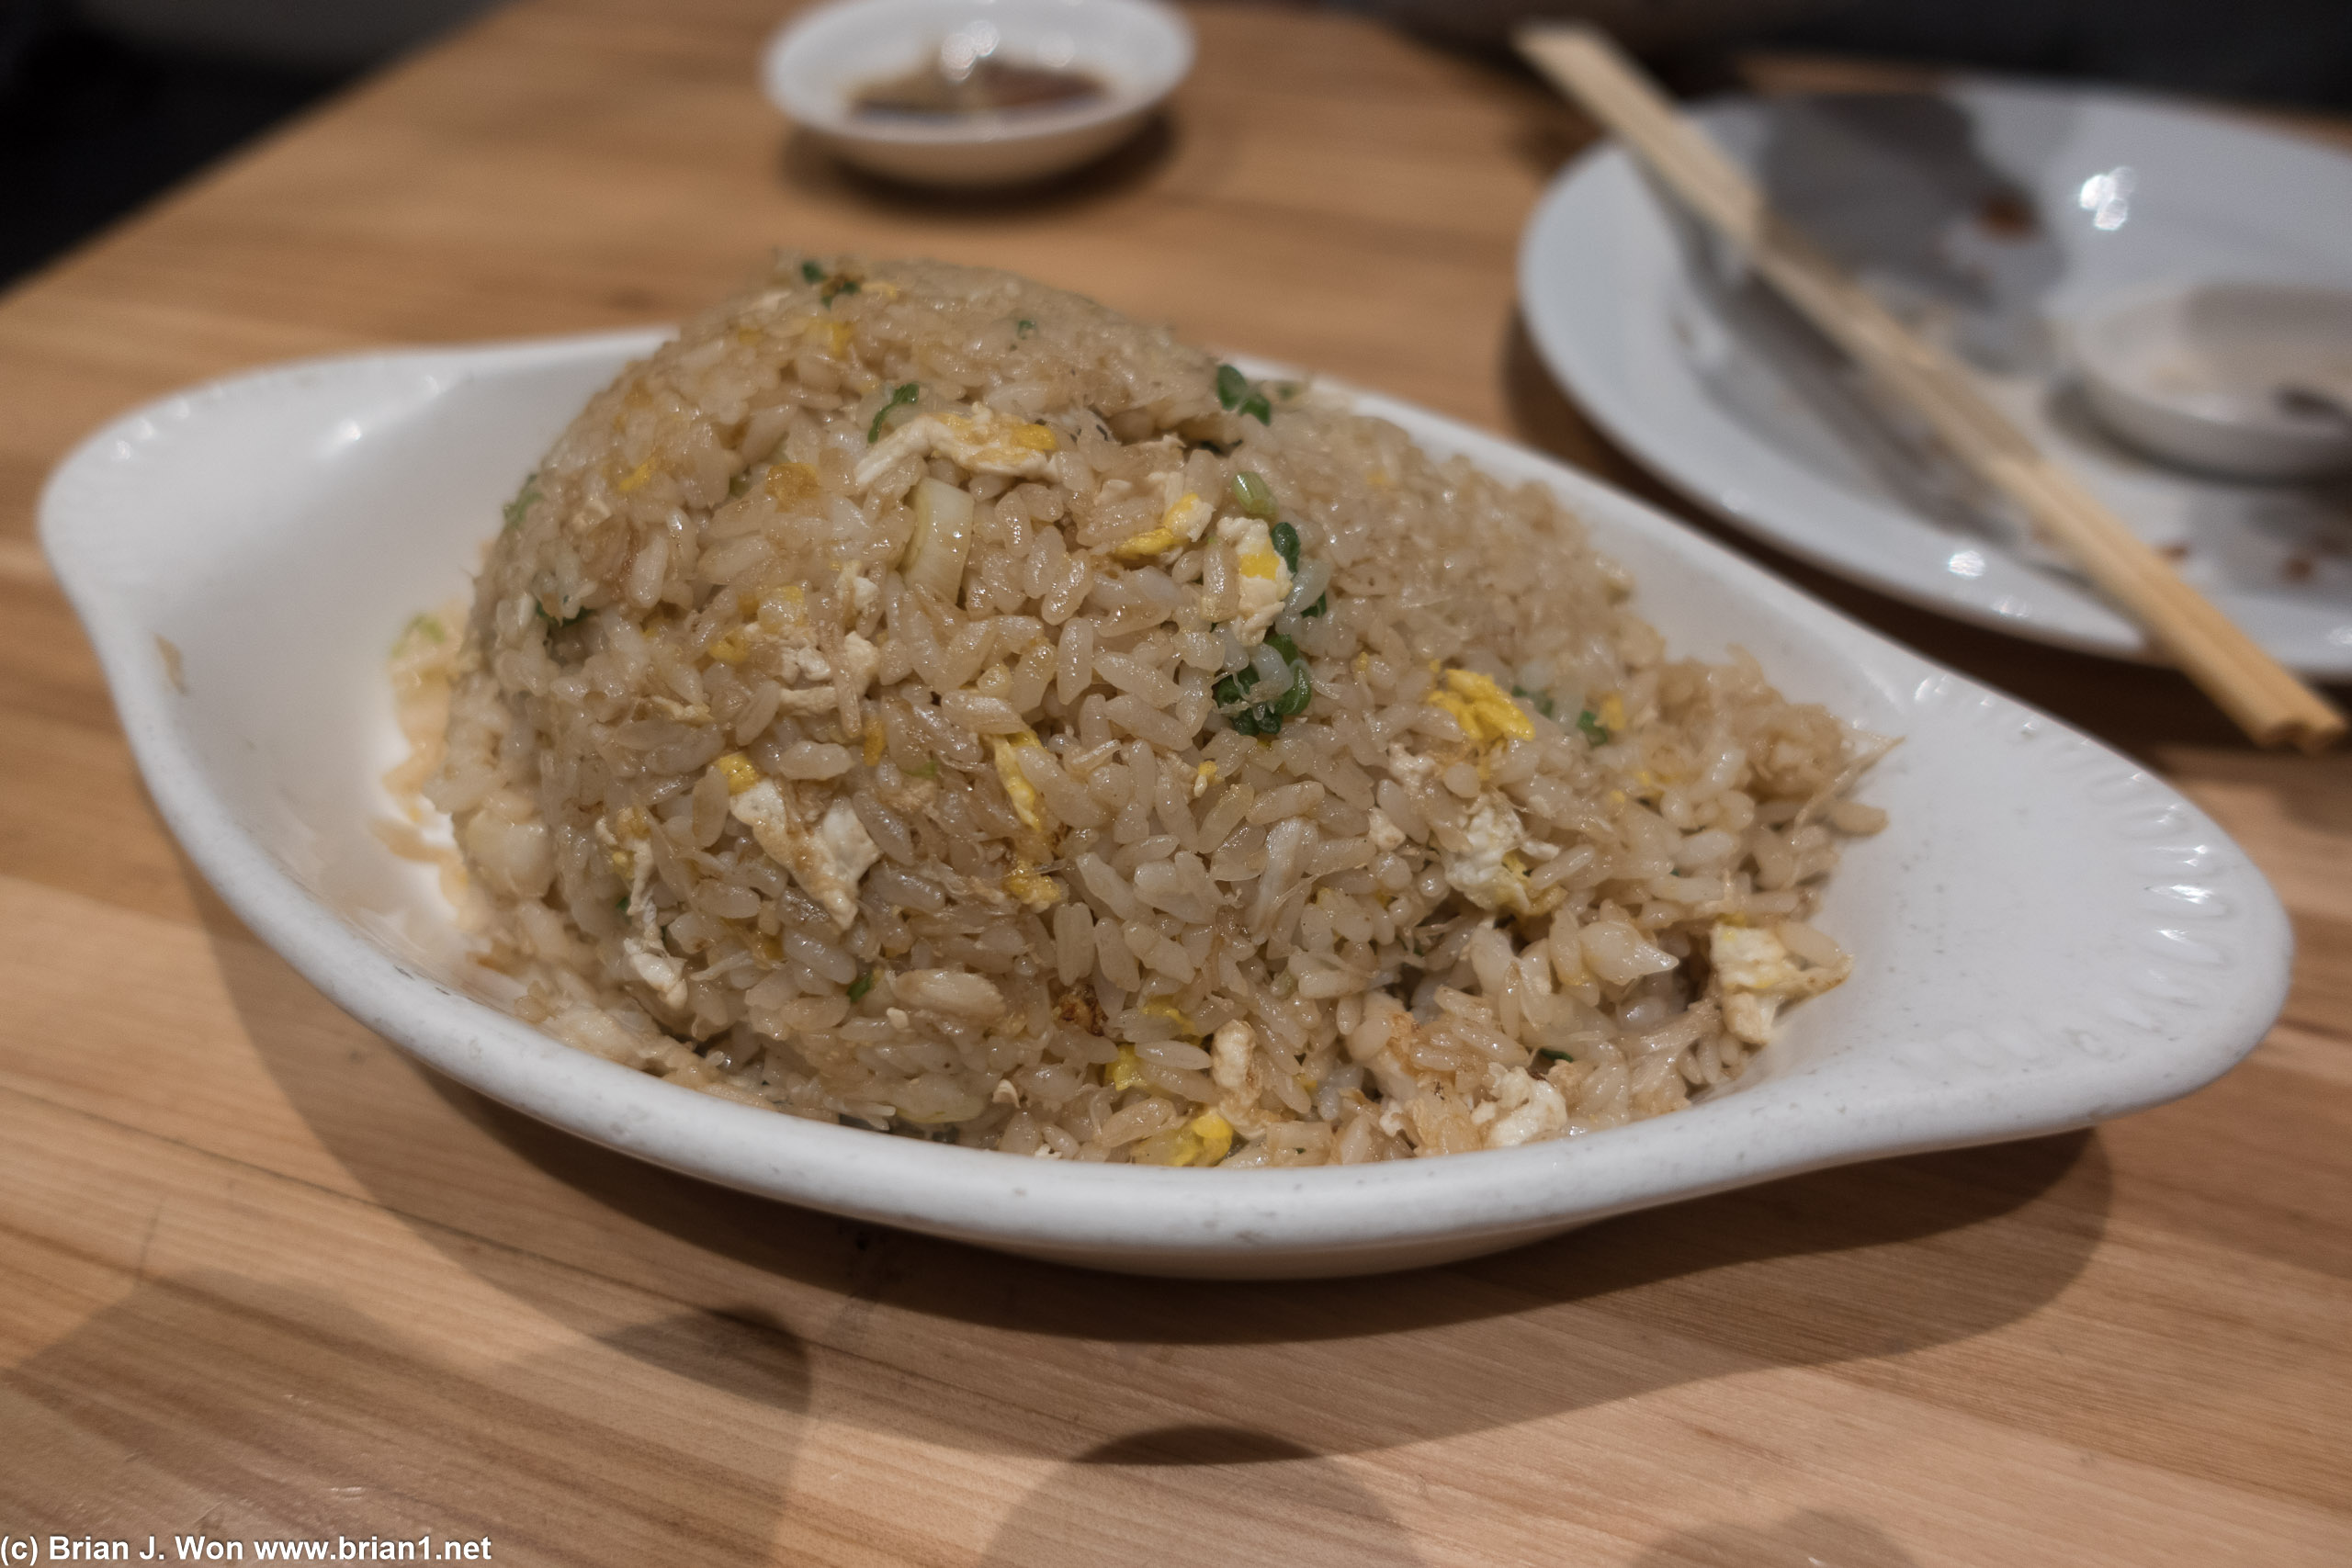 Crab fried rice is okay. Well, better than okay. But not as good as Din Tai Fung.